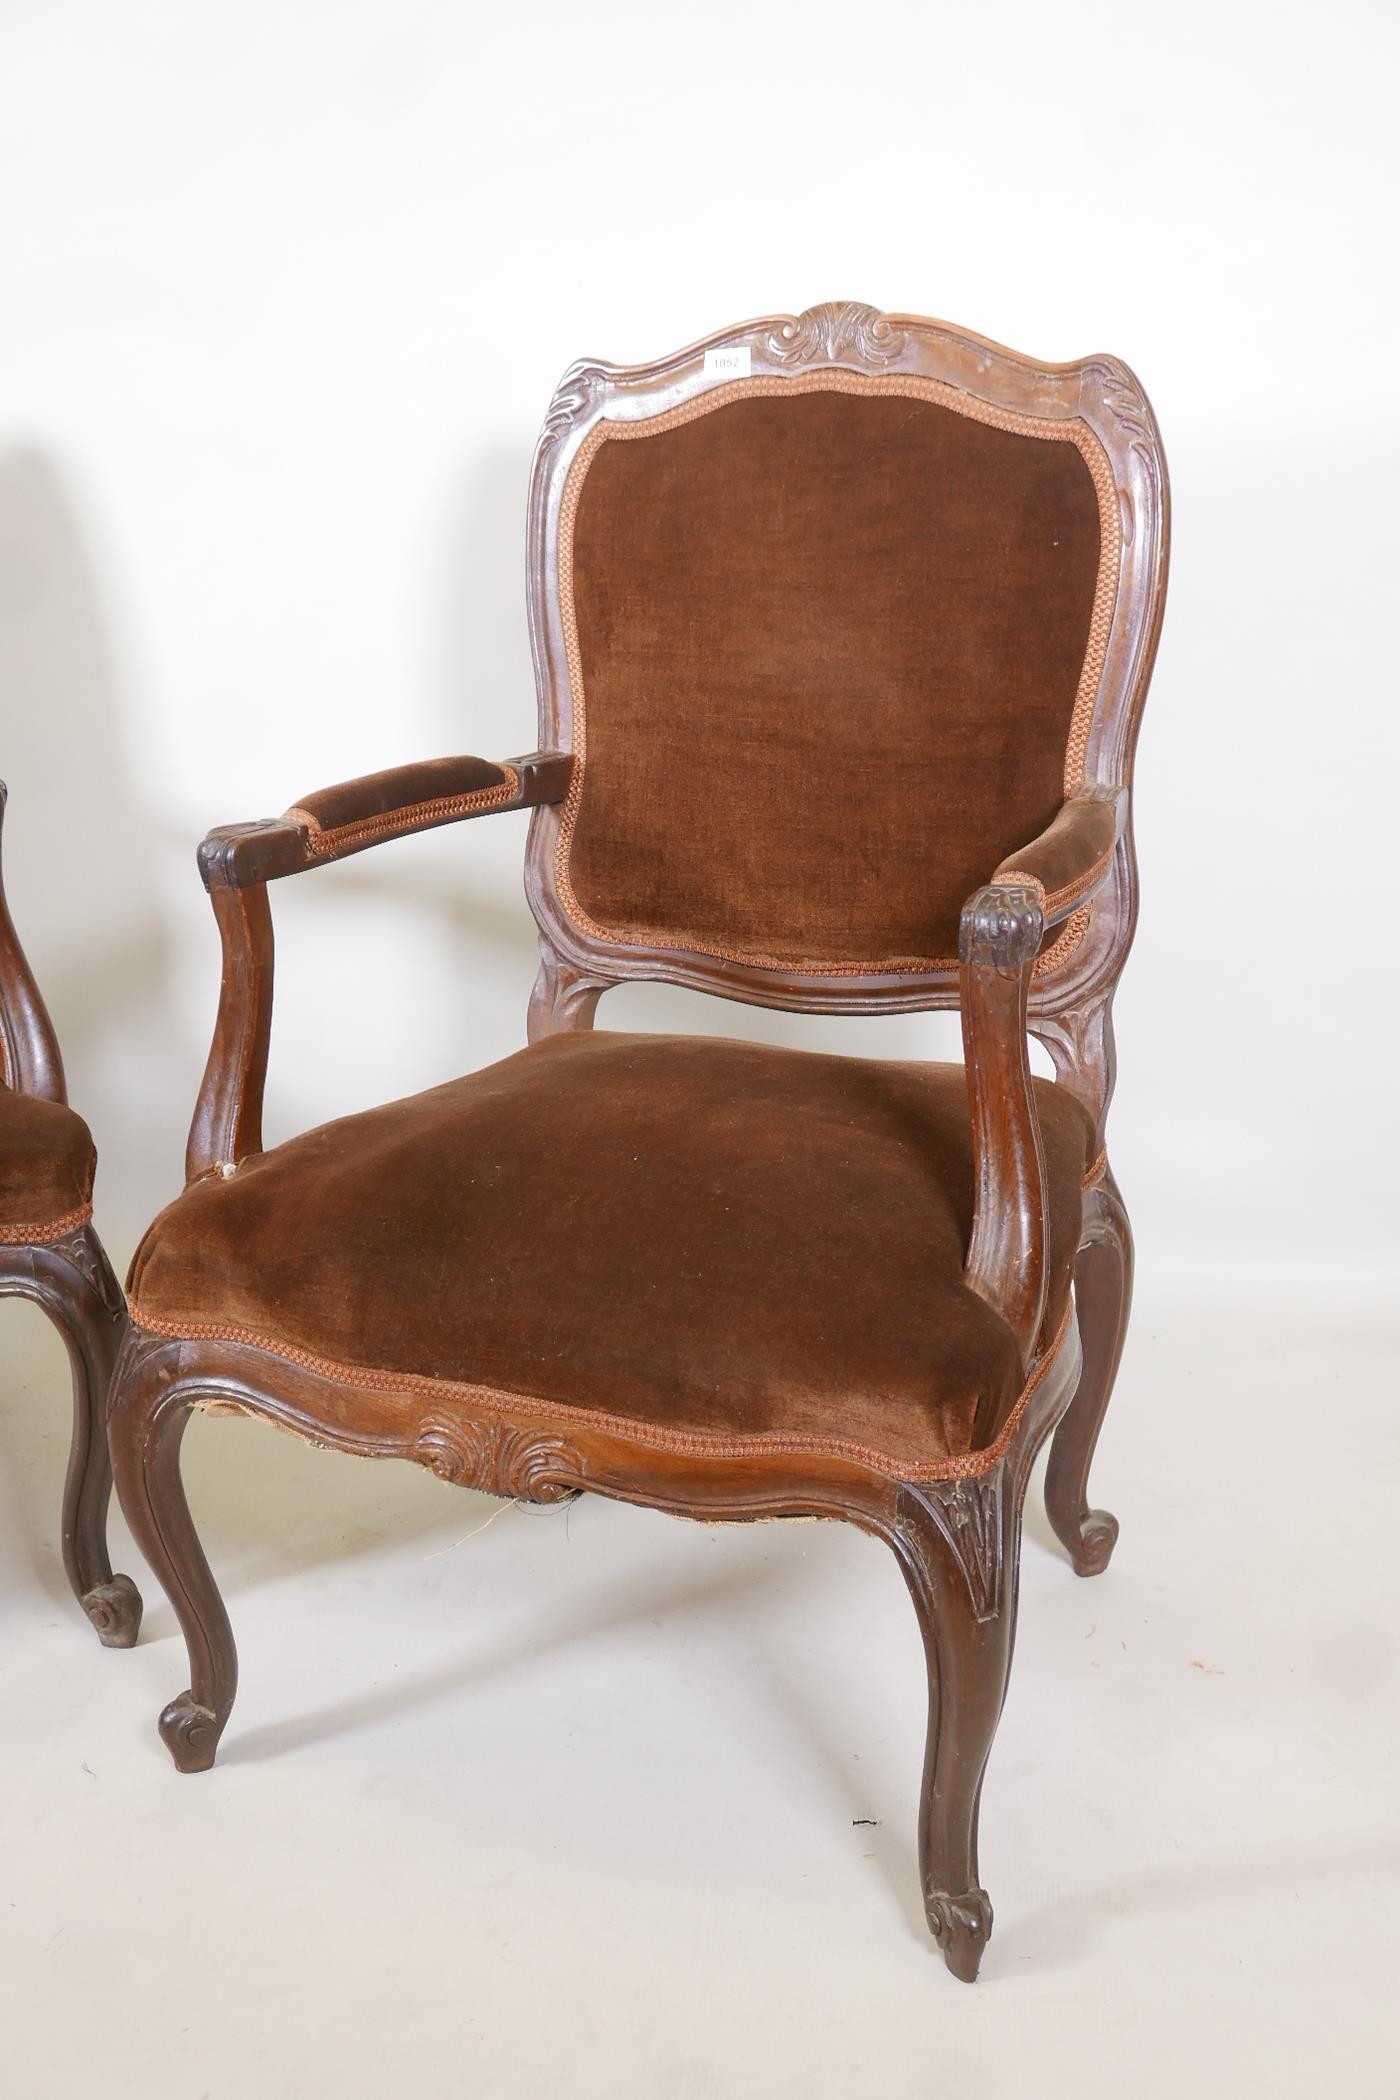 A pair of Continental walnut open armchairs on scroll feet with carved details, 38" high - Image 2 of 4